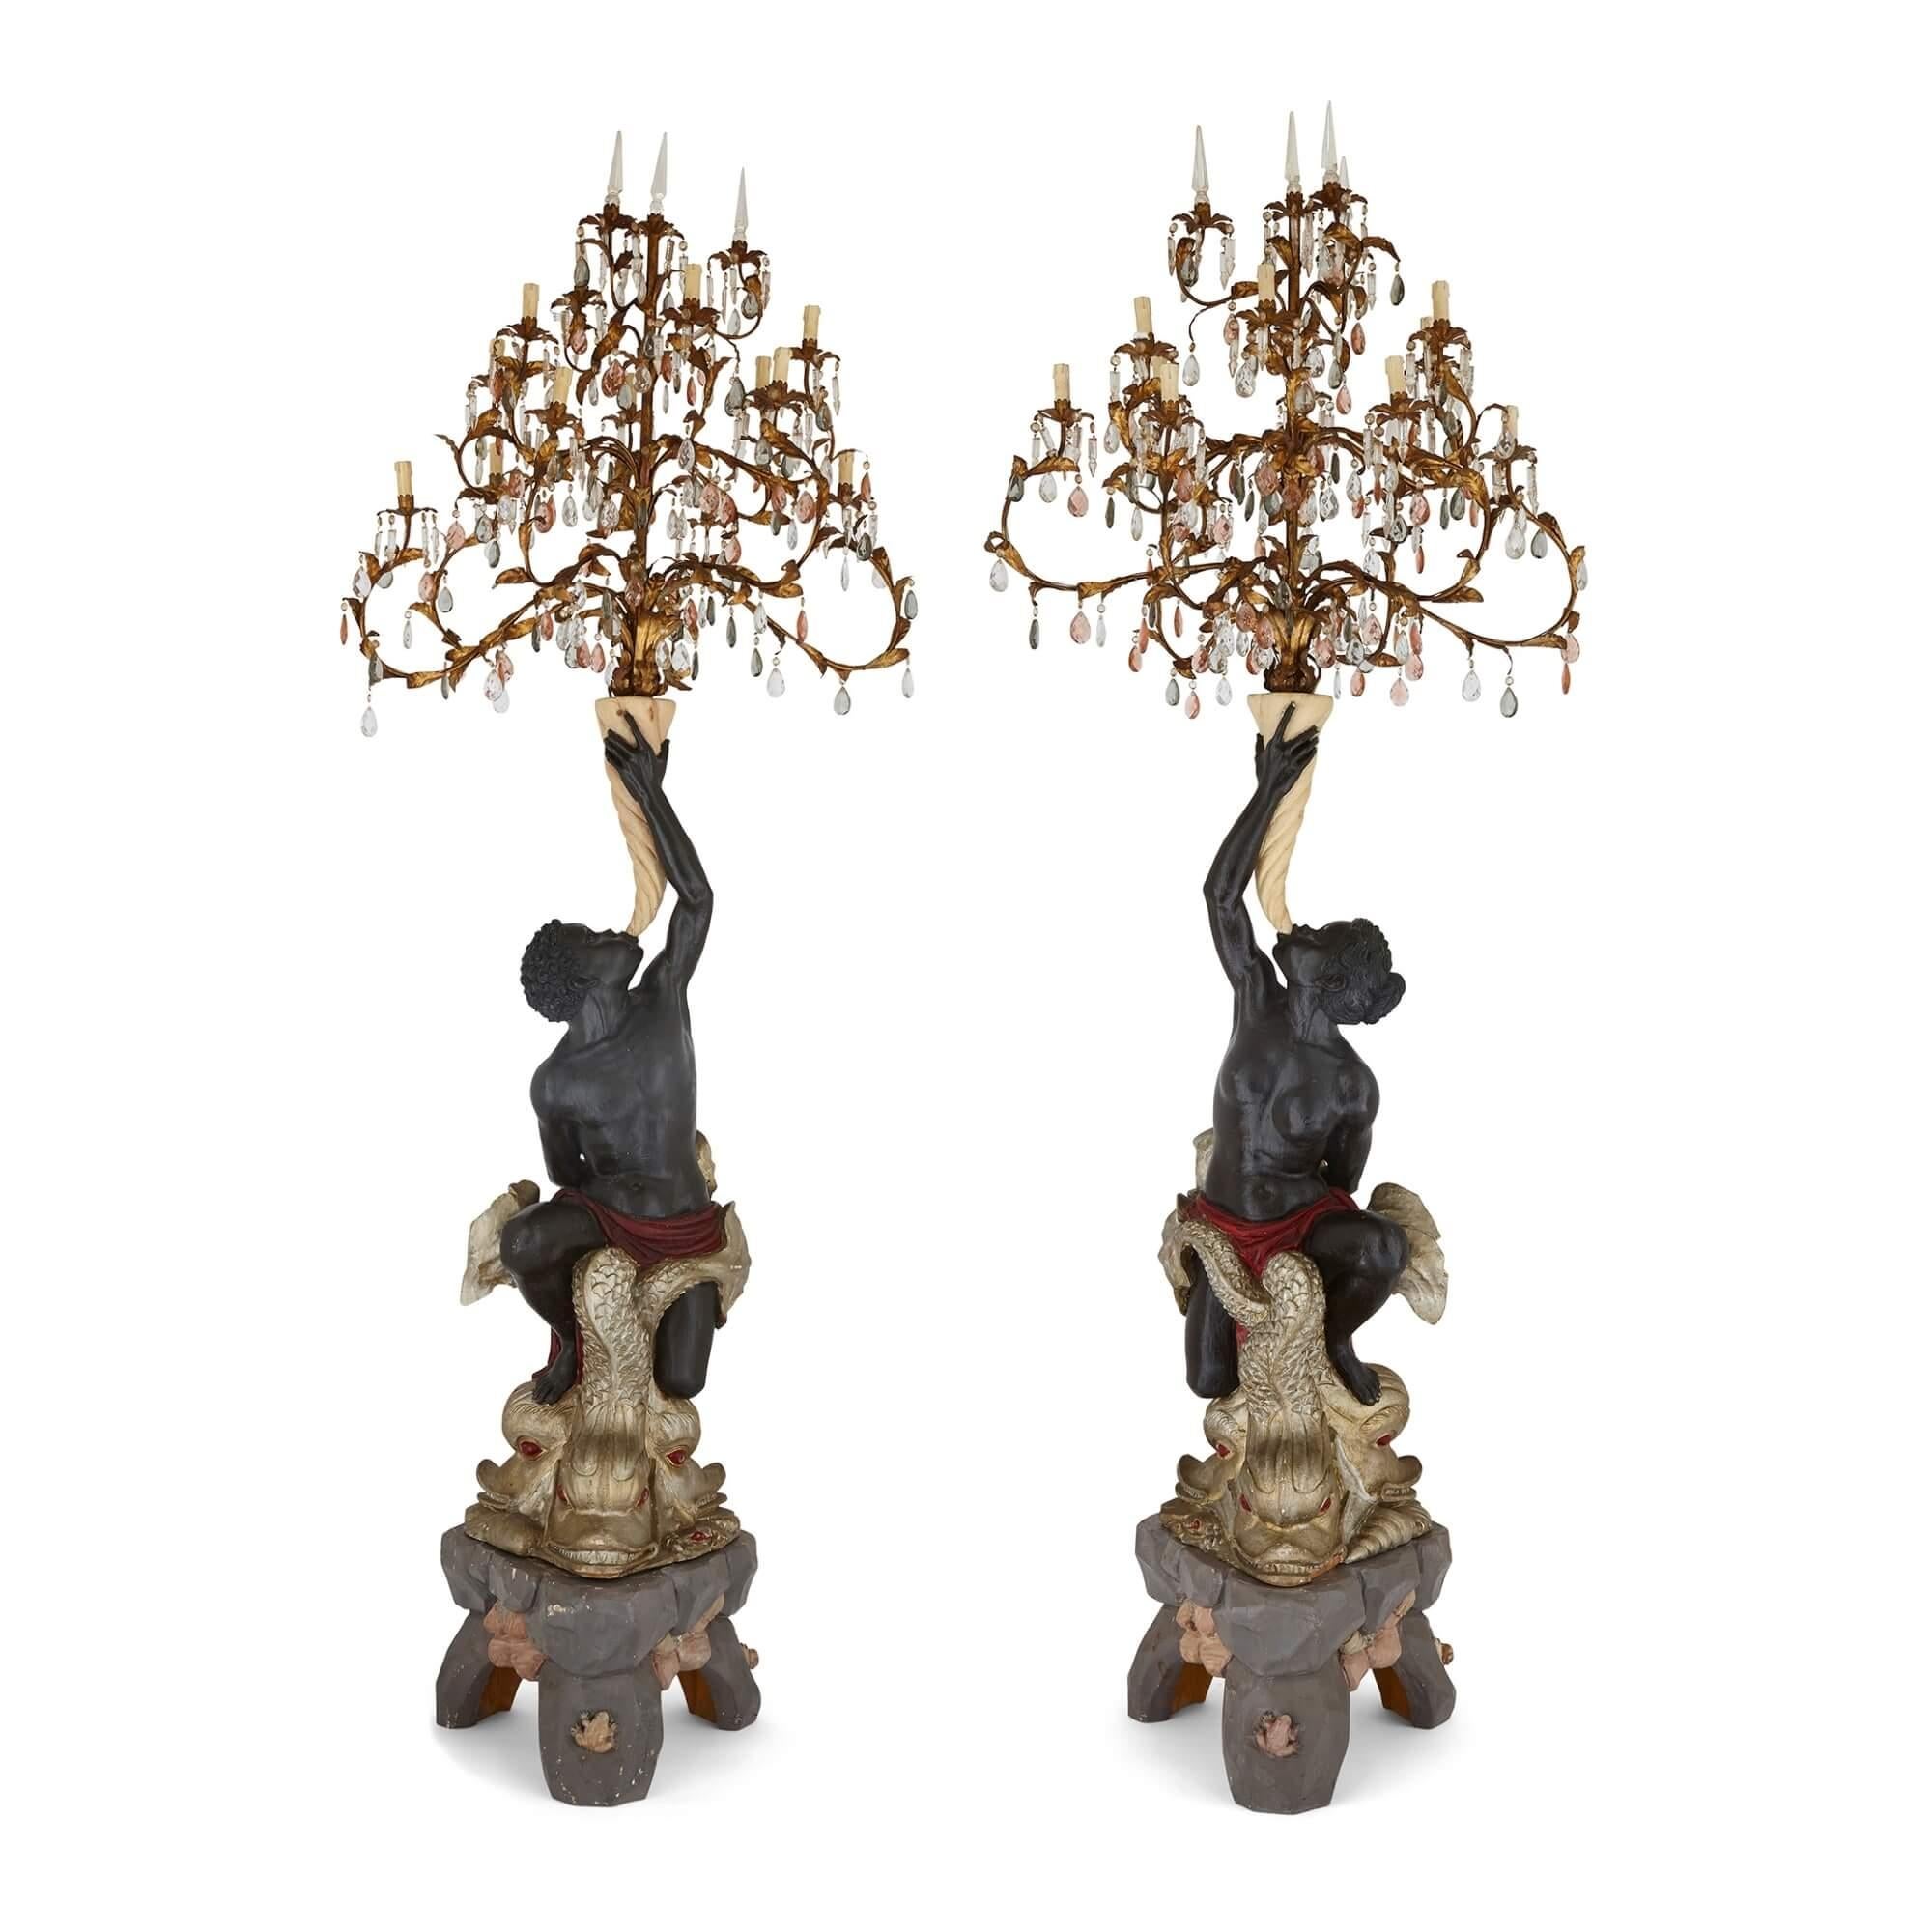 Pair of very large French figurative floor-standing candelabra
French, 19th century
Measures: Height 260cm, width 90cm, depth 90cm

This pair of candelabra are each surmounted by large, gilt bronze candelabras with scrolling branches hung with